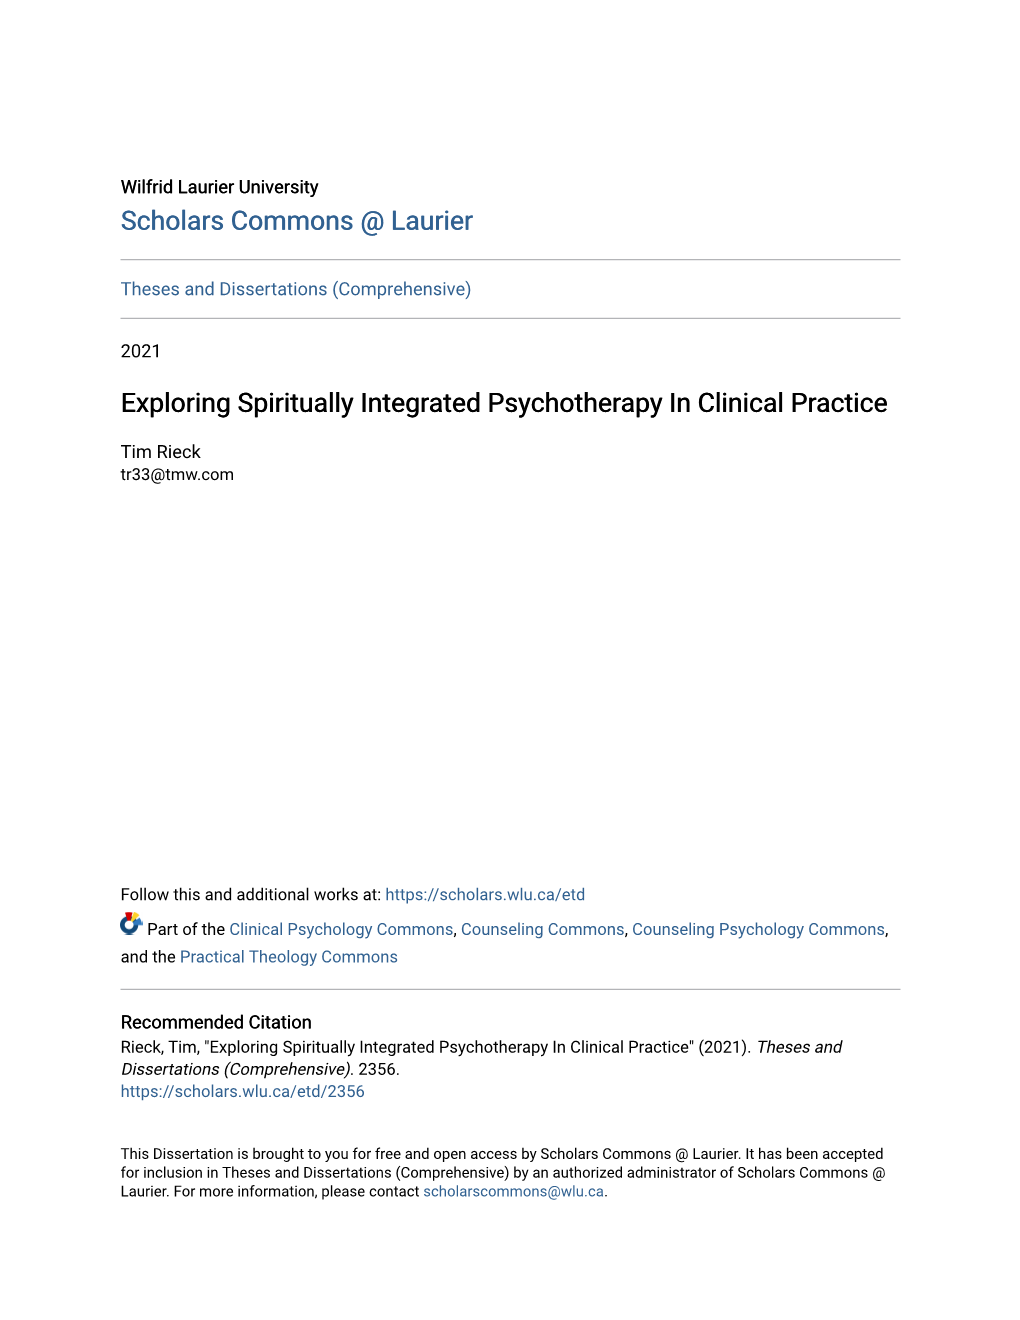 Exploring Spiritually Integrated Psychotherapy in Clinical Practice